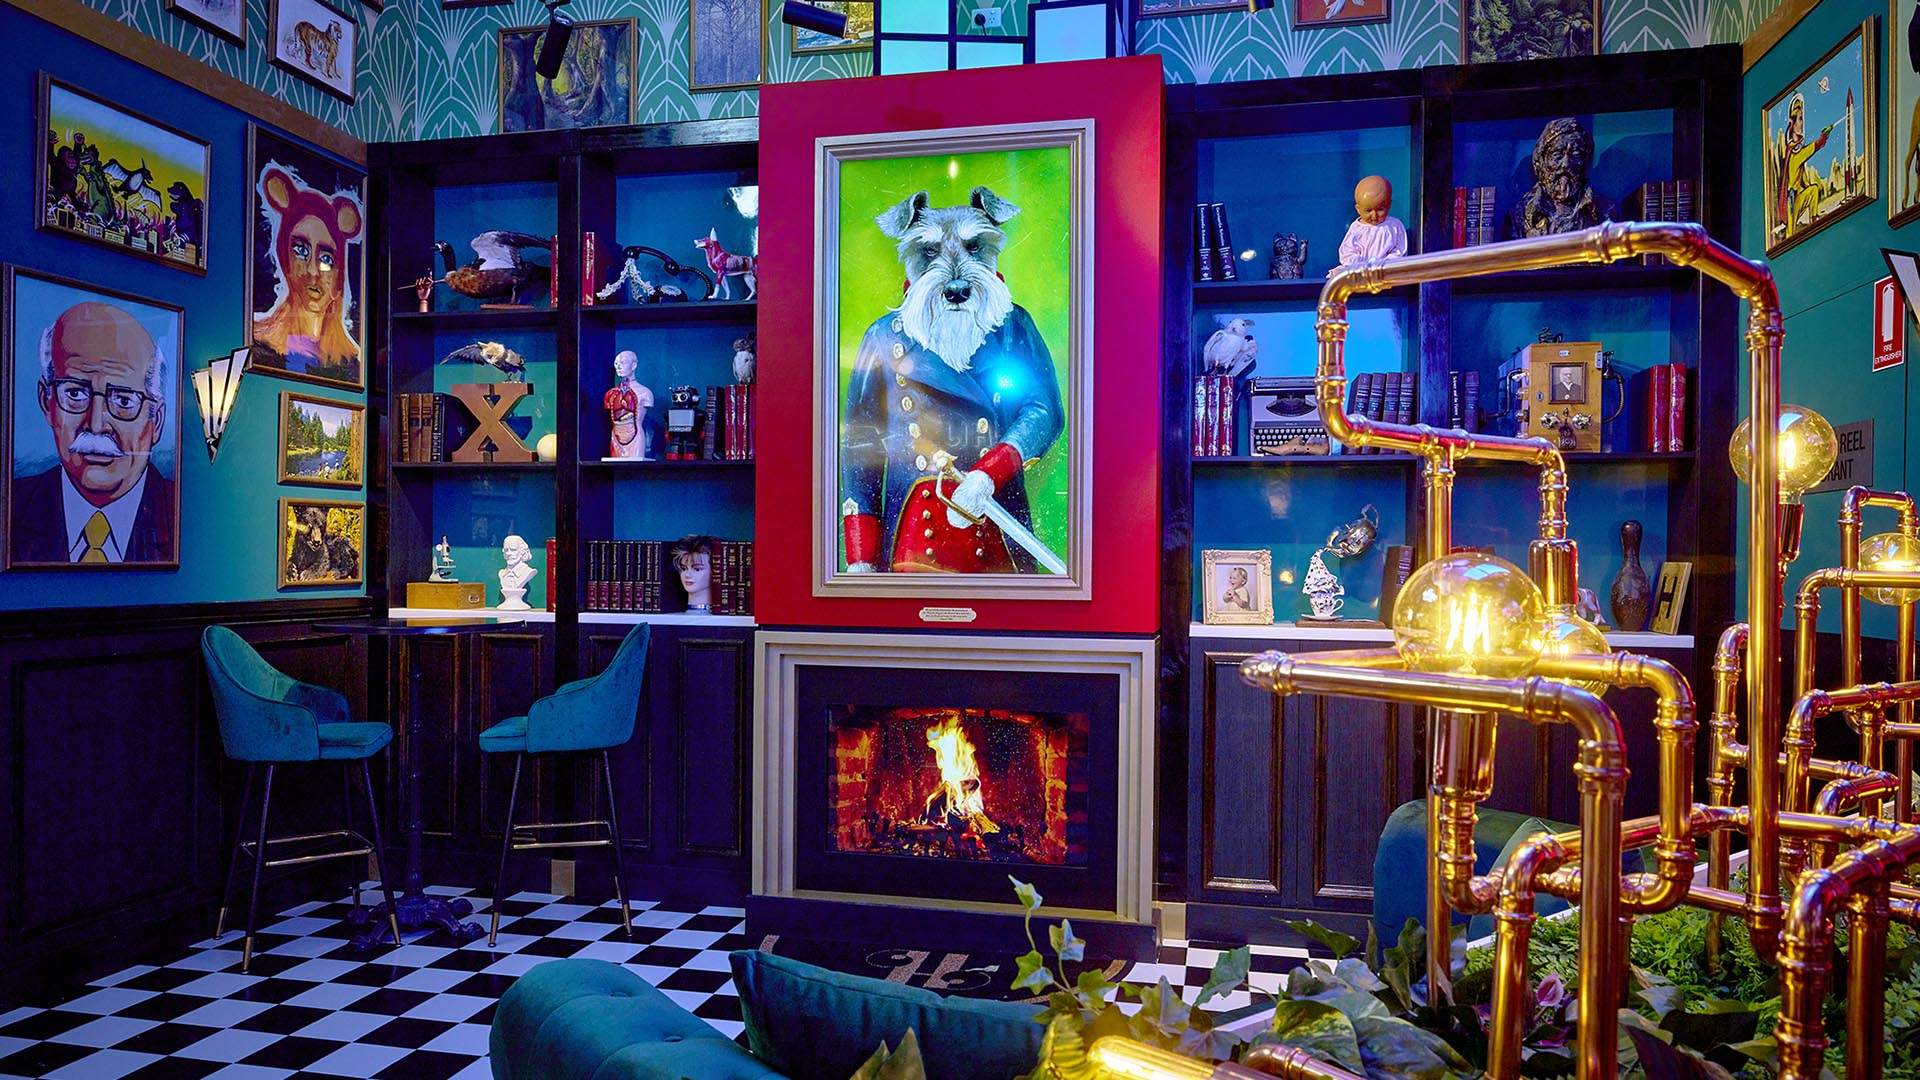 This Is What You Can Expect at Hijinx Hotel, Australia's Nostalgic and OTT New Challenge Room Bar